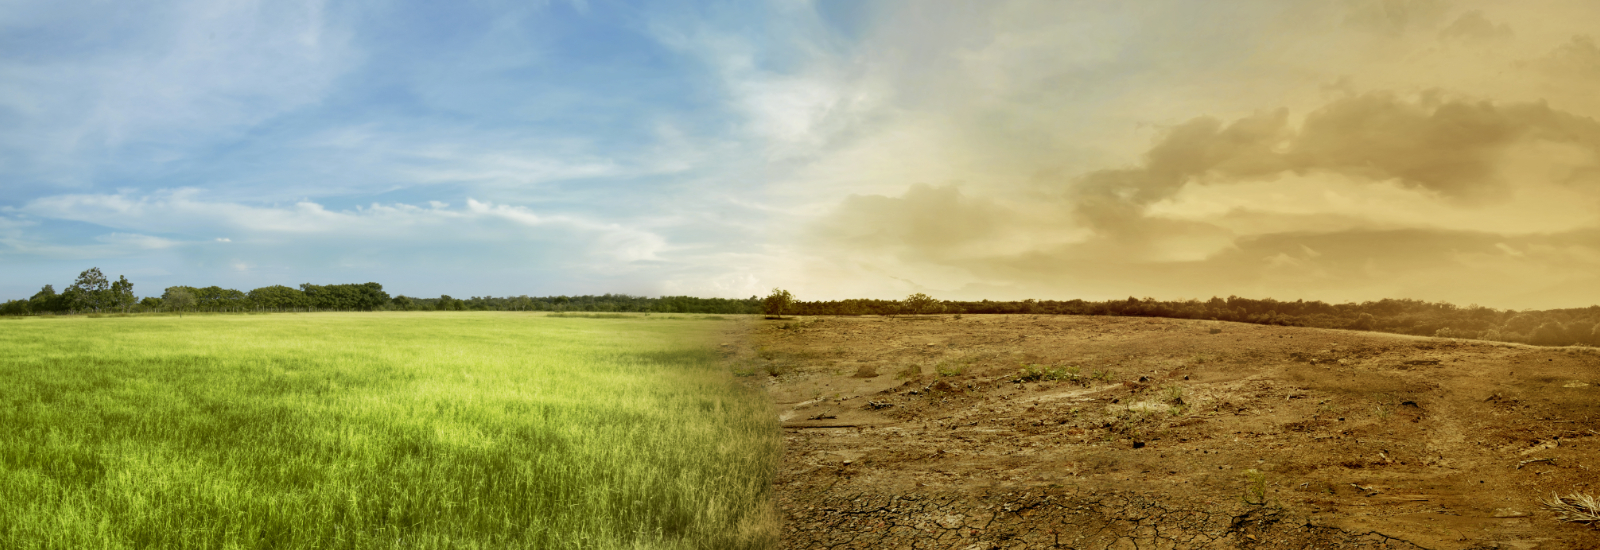 Image depicting a green field on the left and a dried up field on the right, illustrating climate change